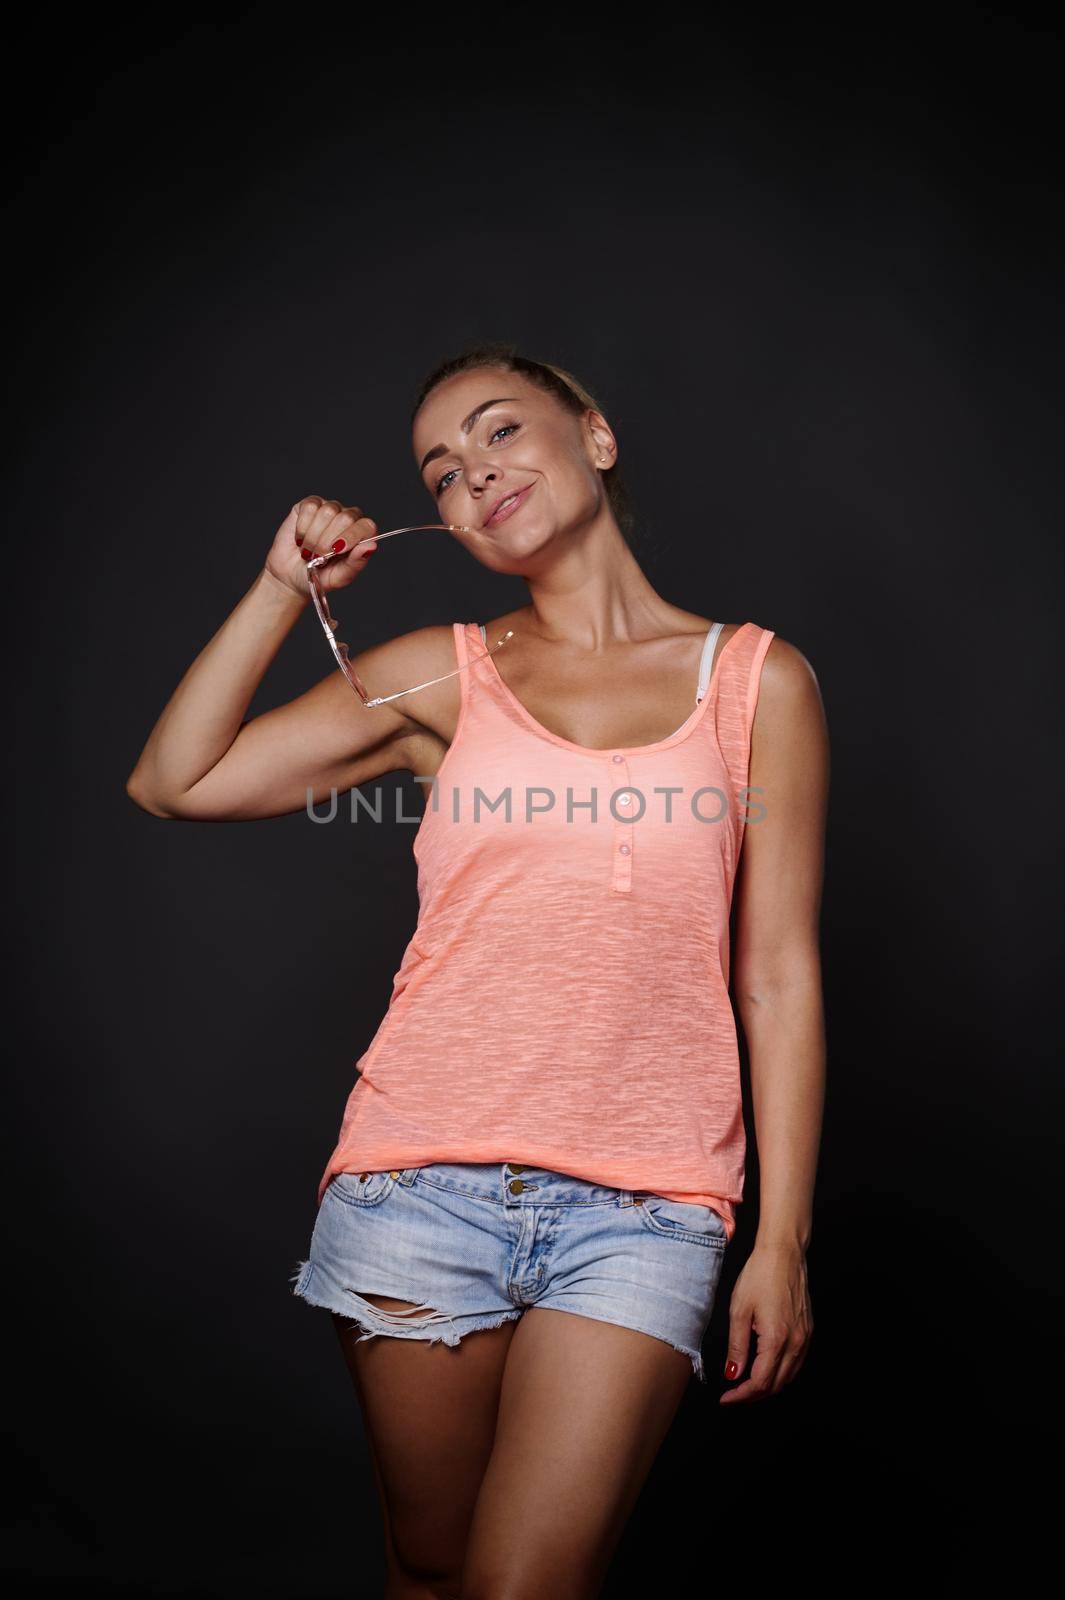 Charming sexy young blonde European pretty woman with tanned skin, aesthetic fit body in denim shorts, pink top and sunglasses posing over black background with copy ad space